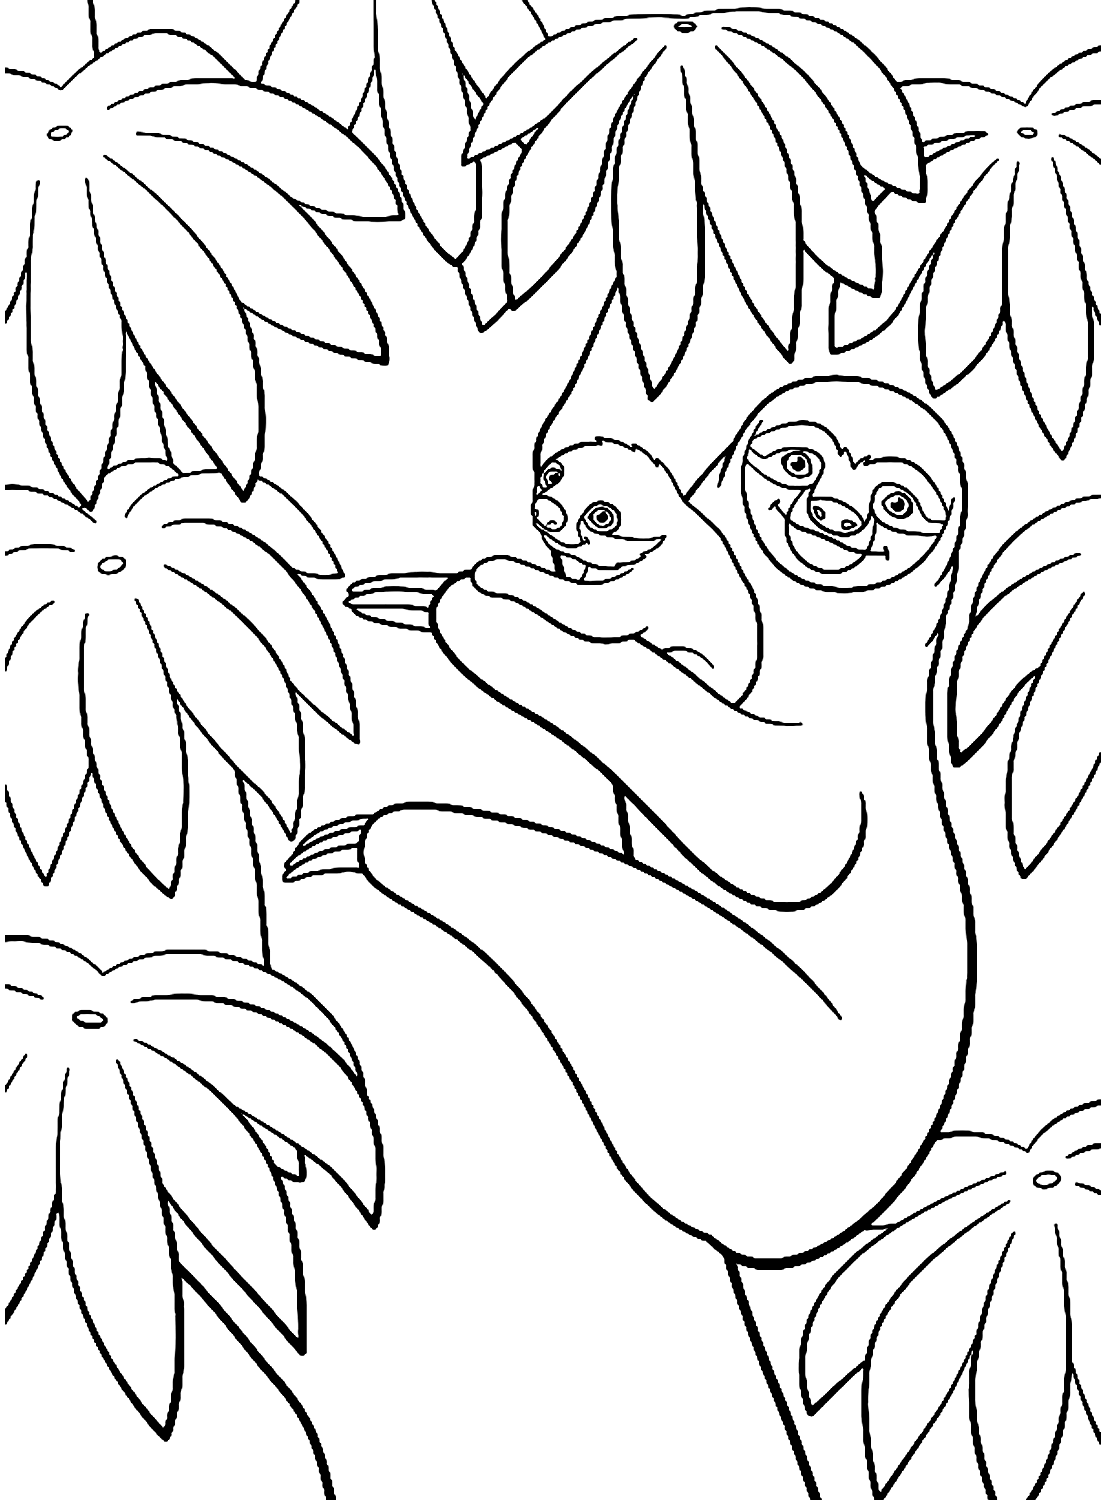 Baby with Mother Sloth Coloring Pages